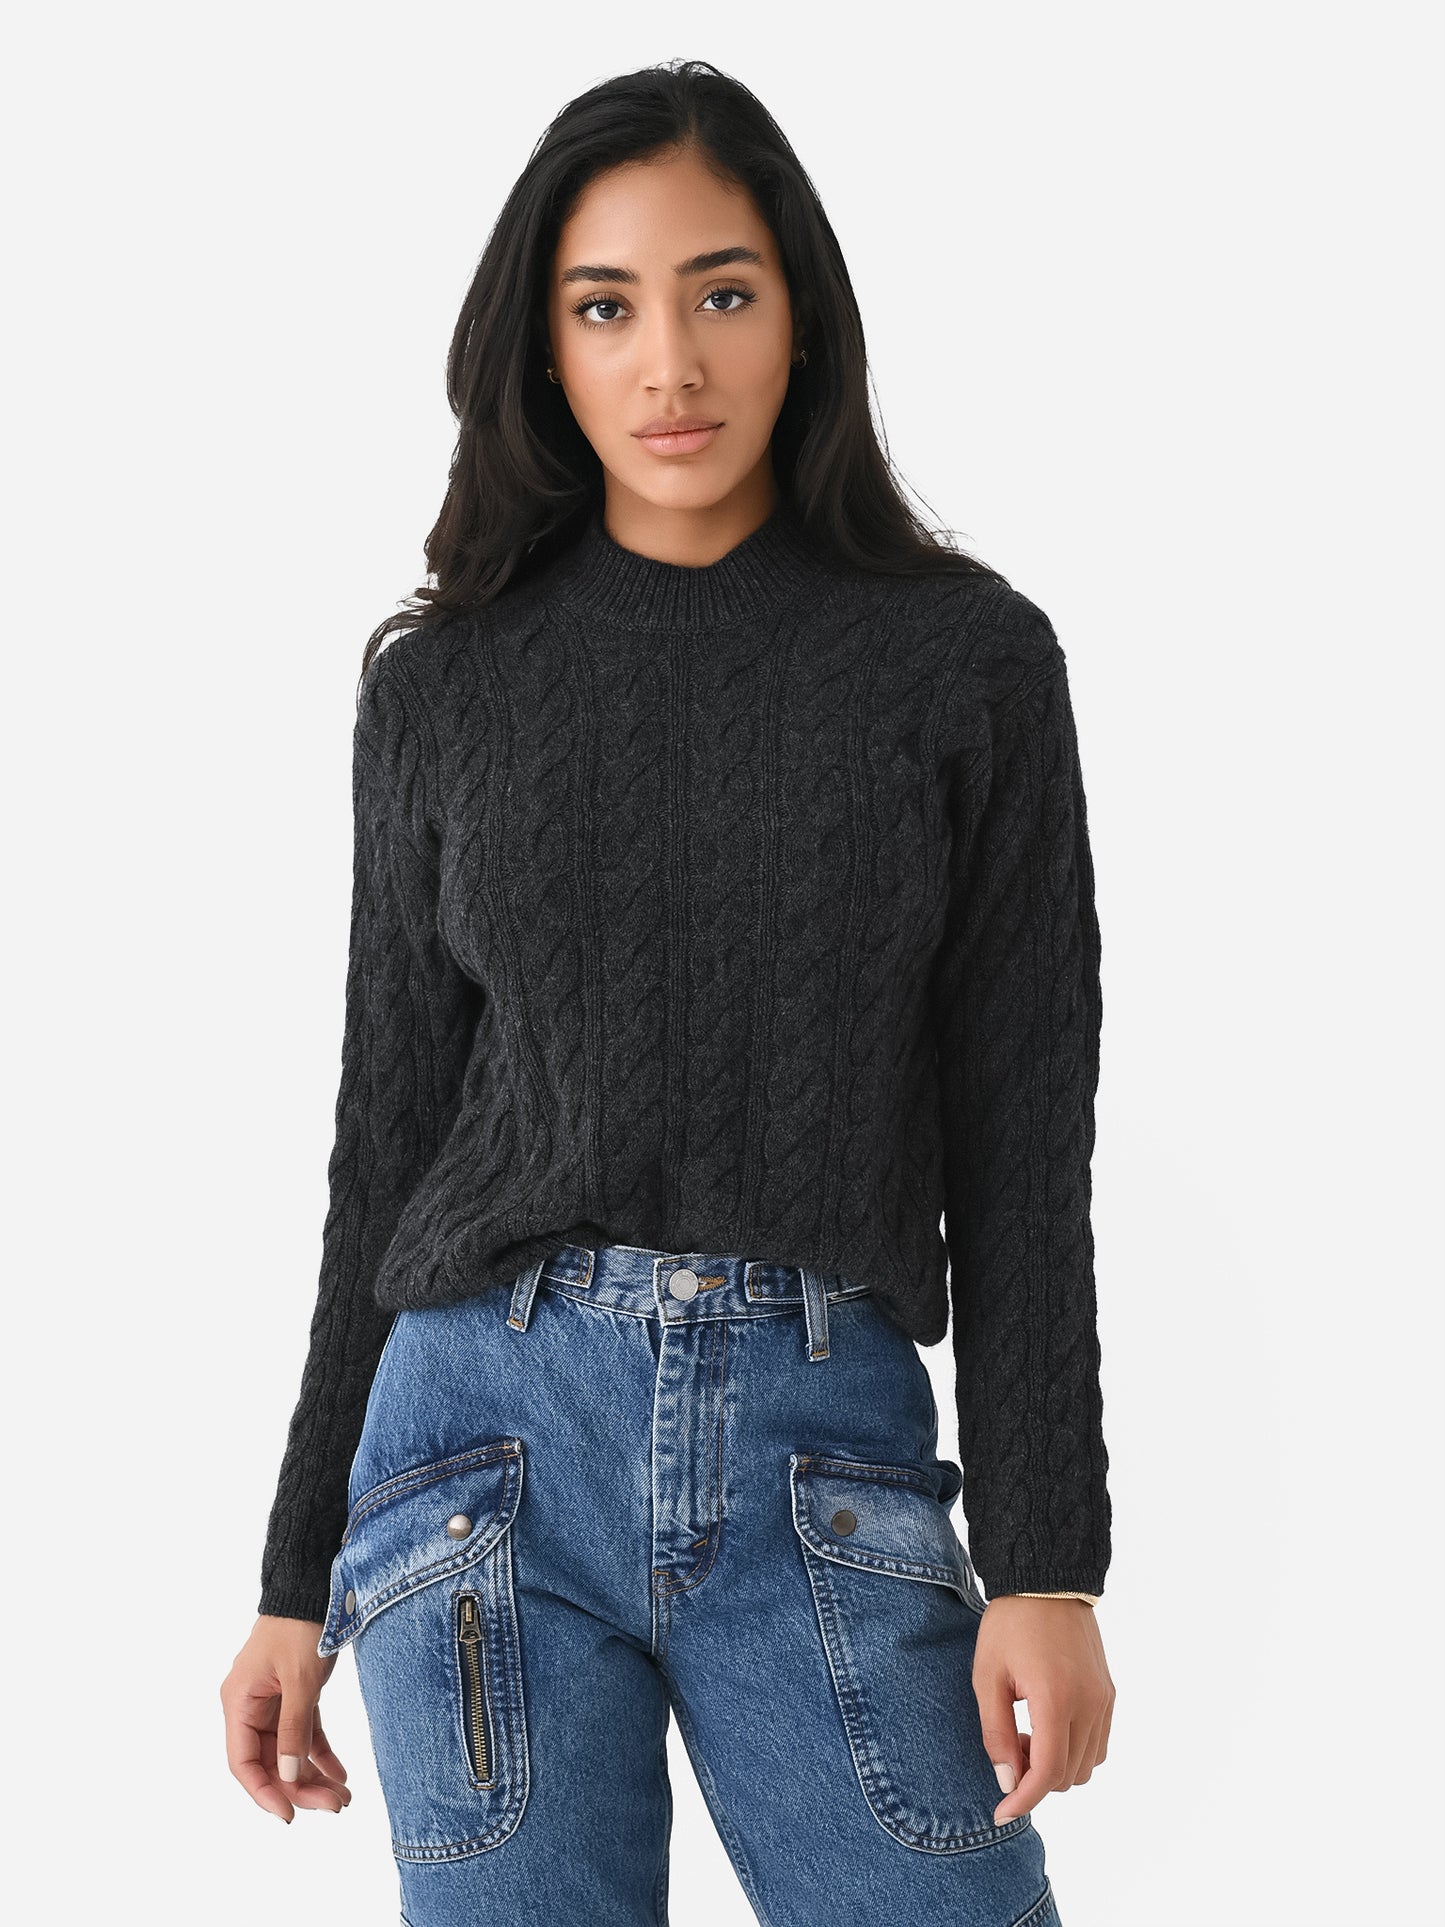 Vince Women's Wool Blend Twisted Cable Crewneck Sweater